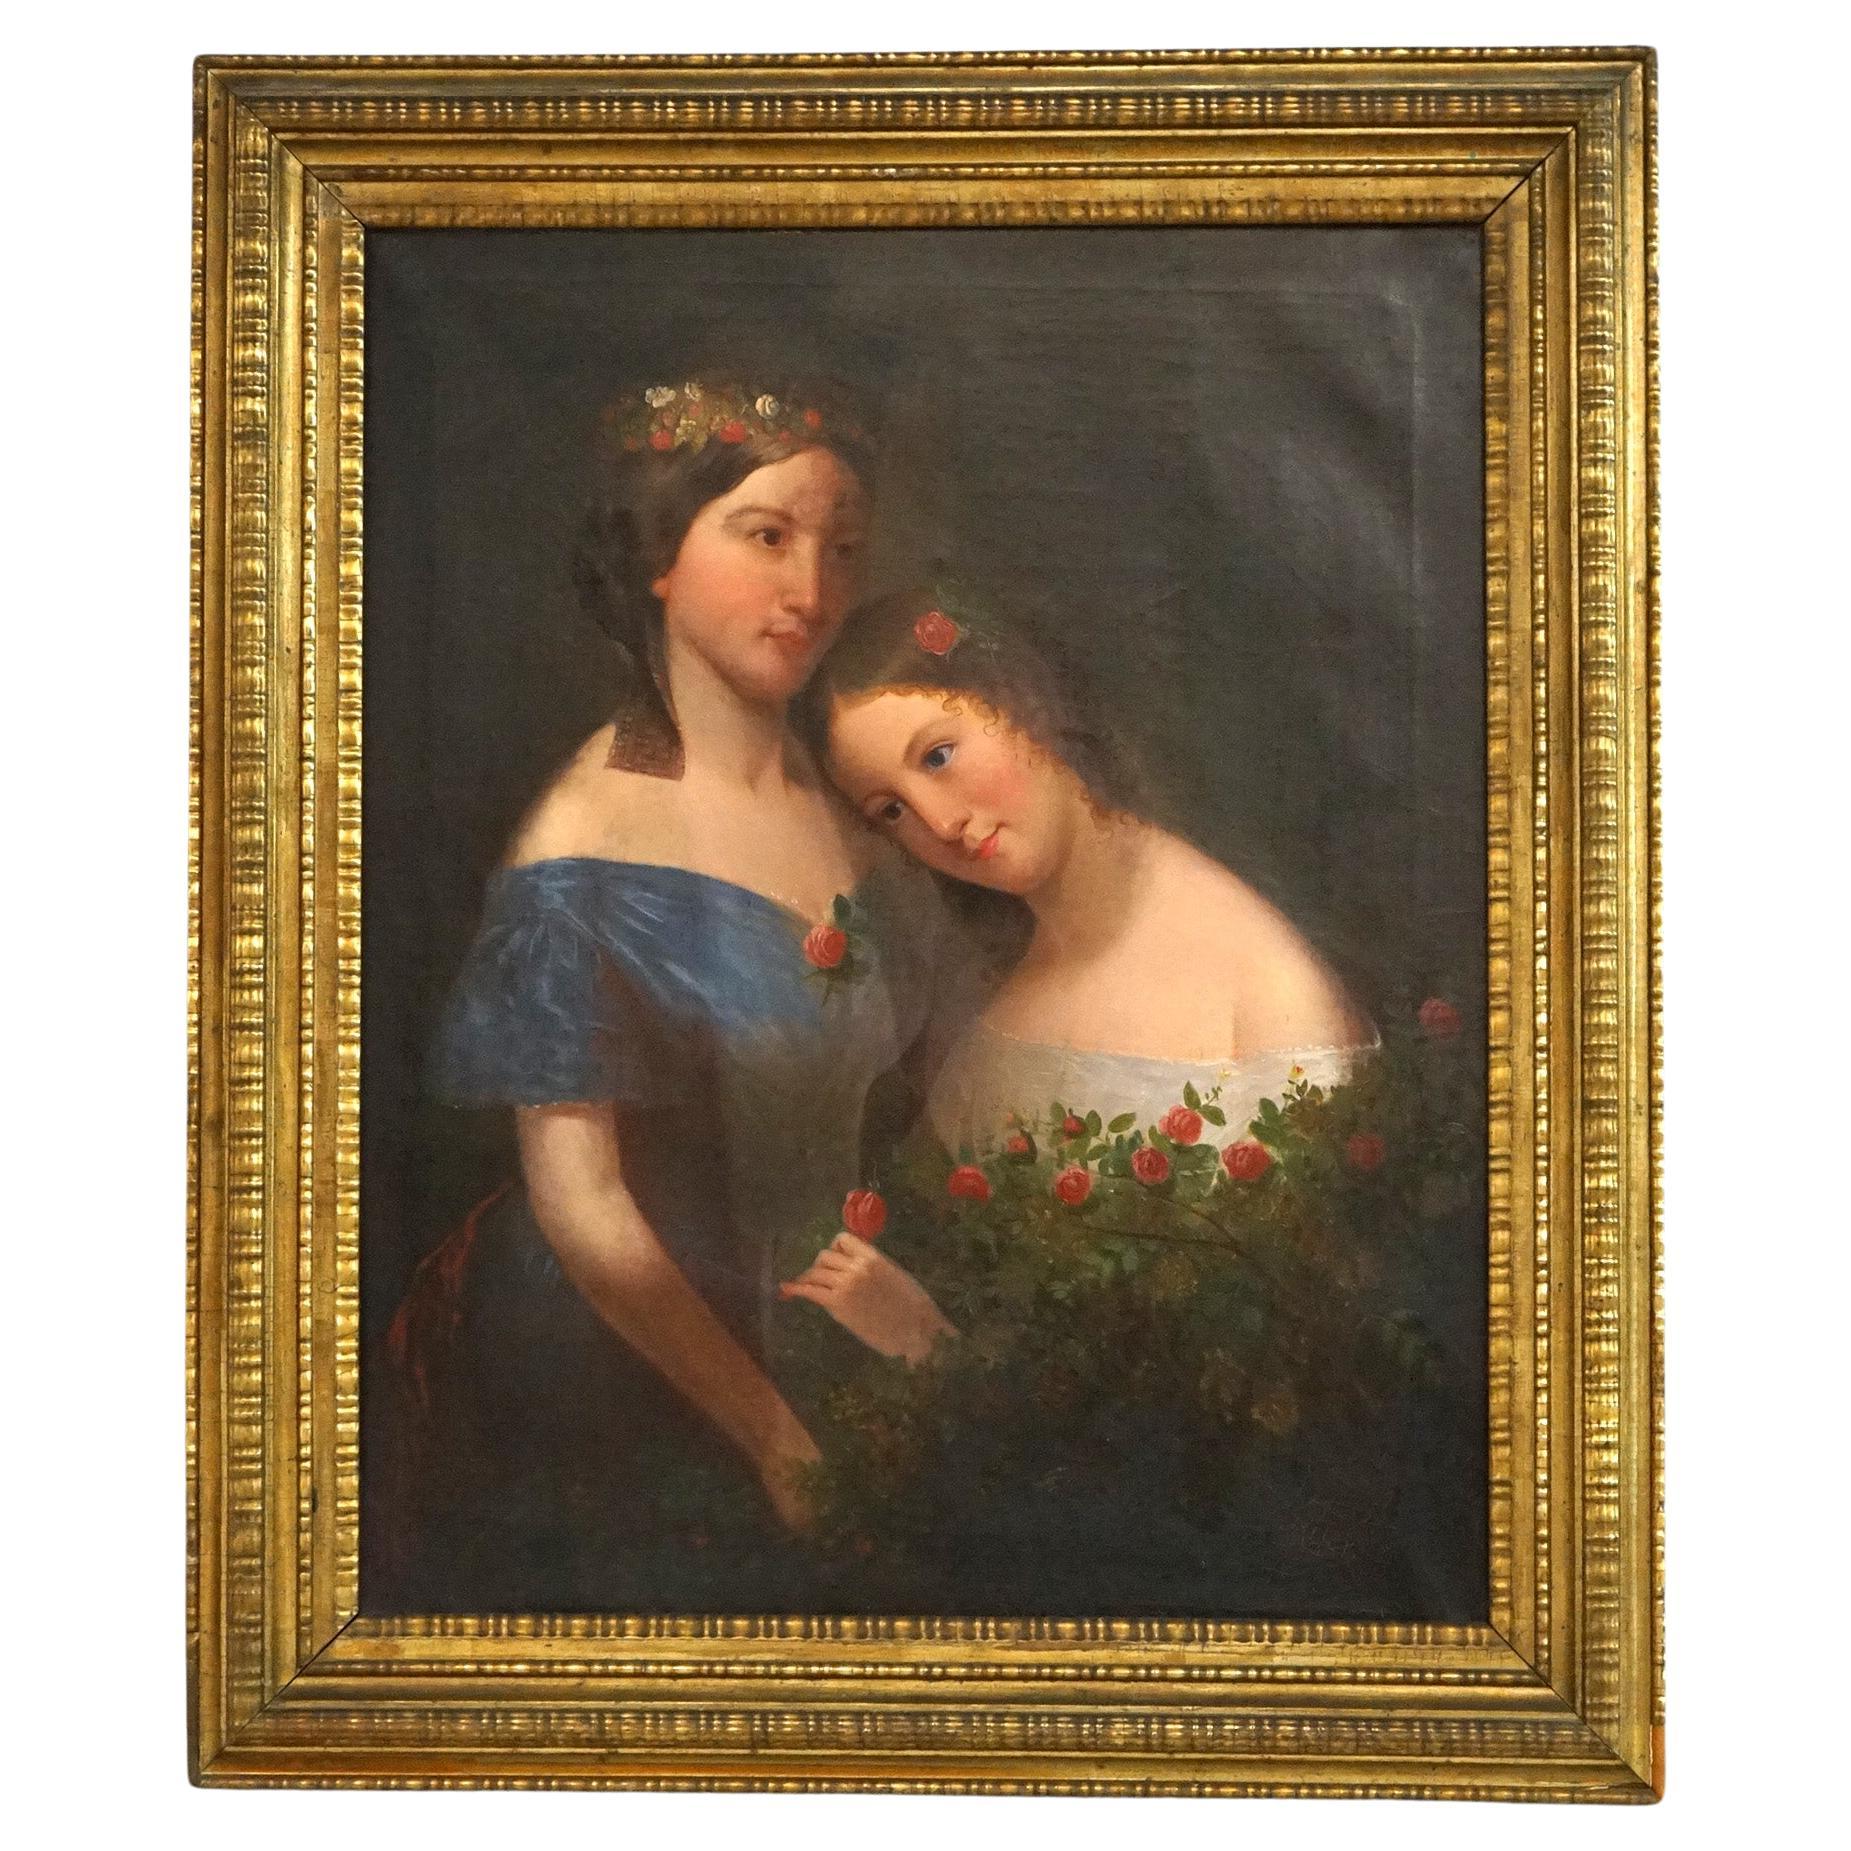 Antique Double Portrait Oil Painting with Roses & Original Giltwood Frame c1840